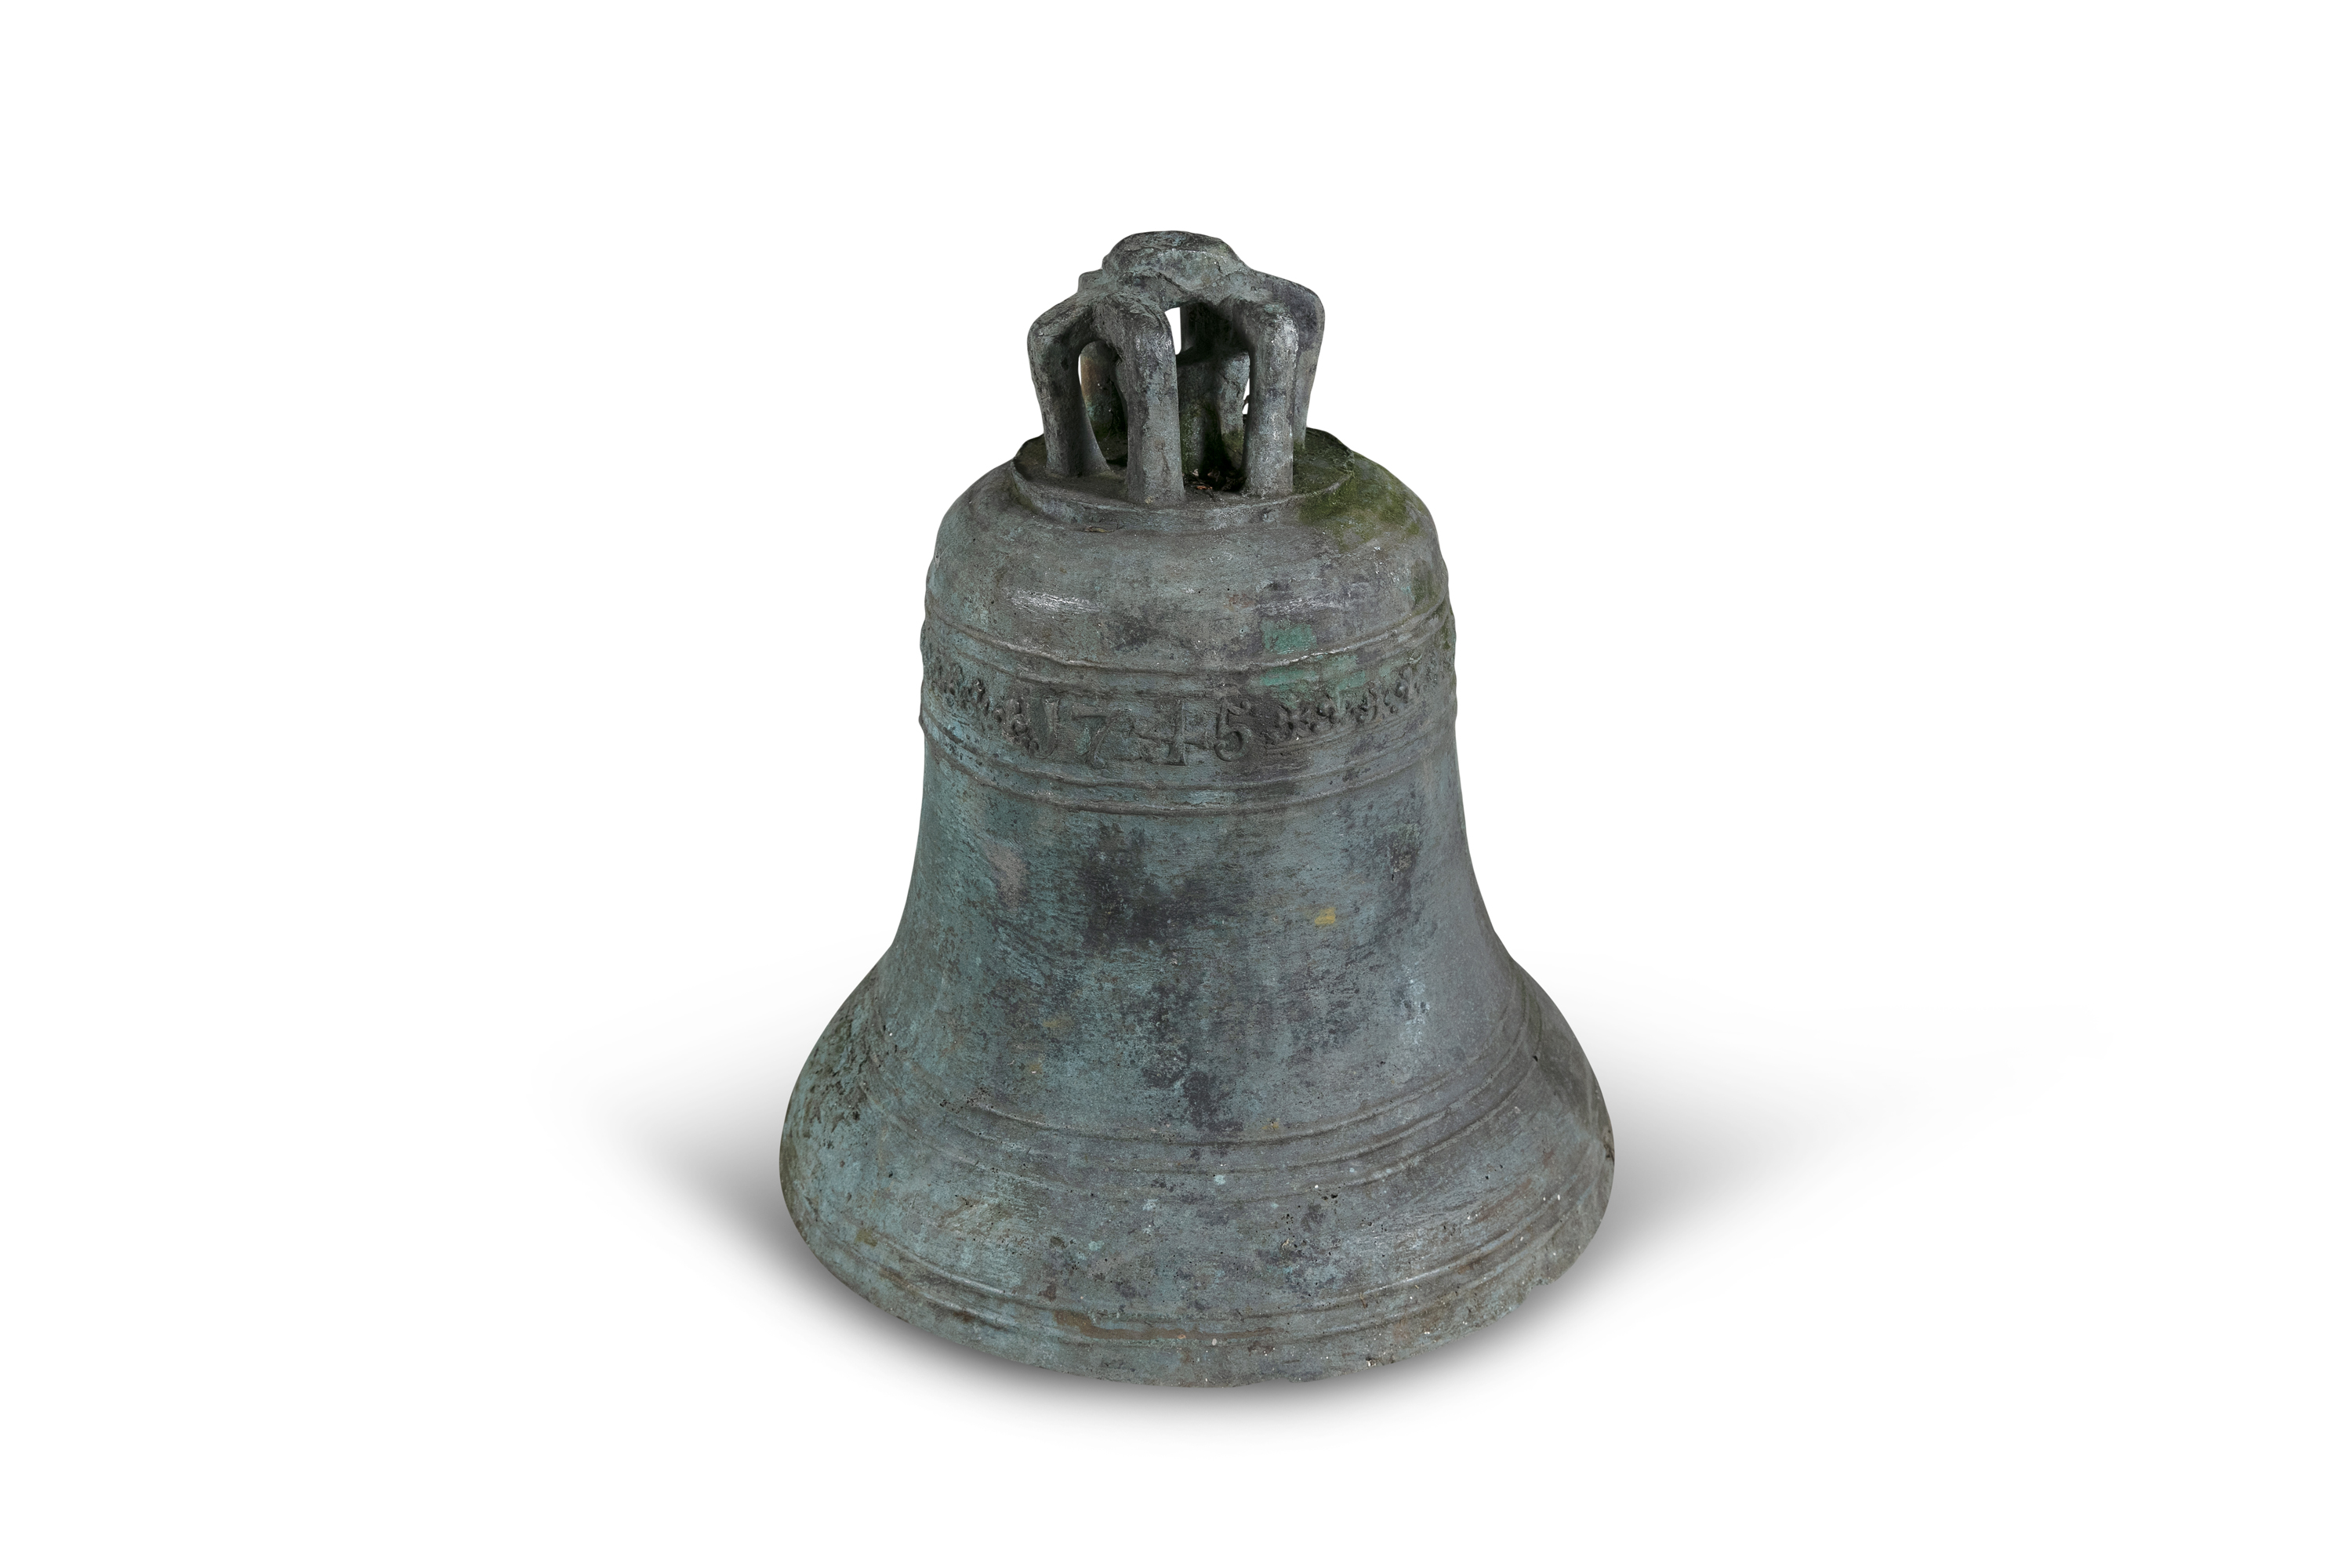 AN 18TH CENTURY BRONZE SHIPS BELL, of usual design, surmounted with an openwork suspension loop, the